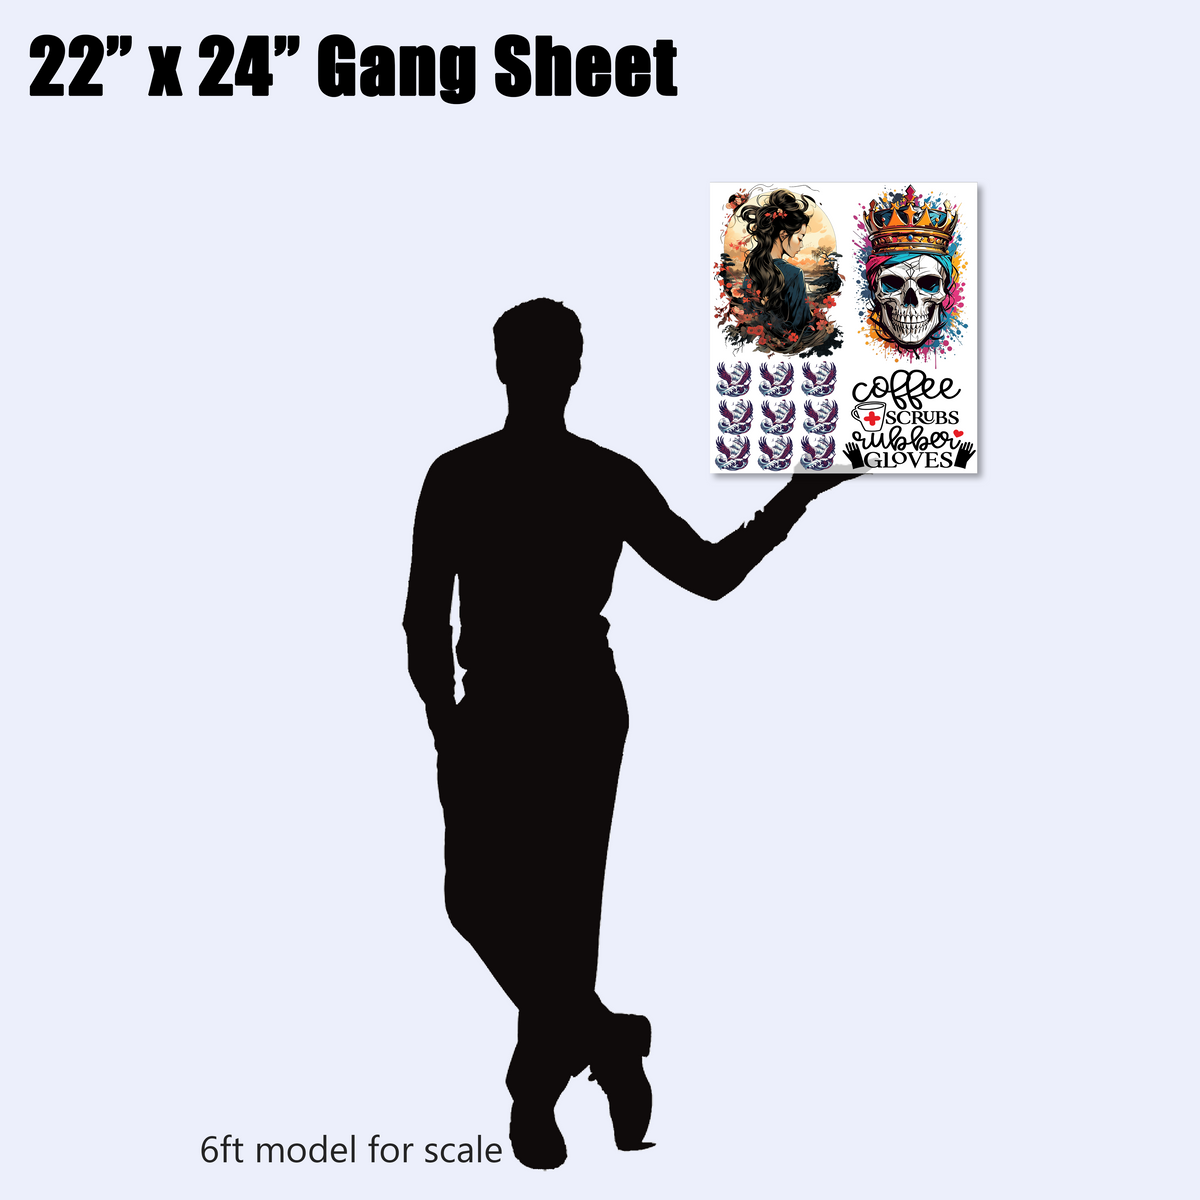 DTF - Build Your Own Gang Sheet